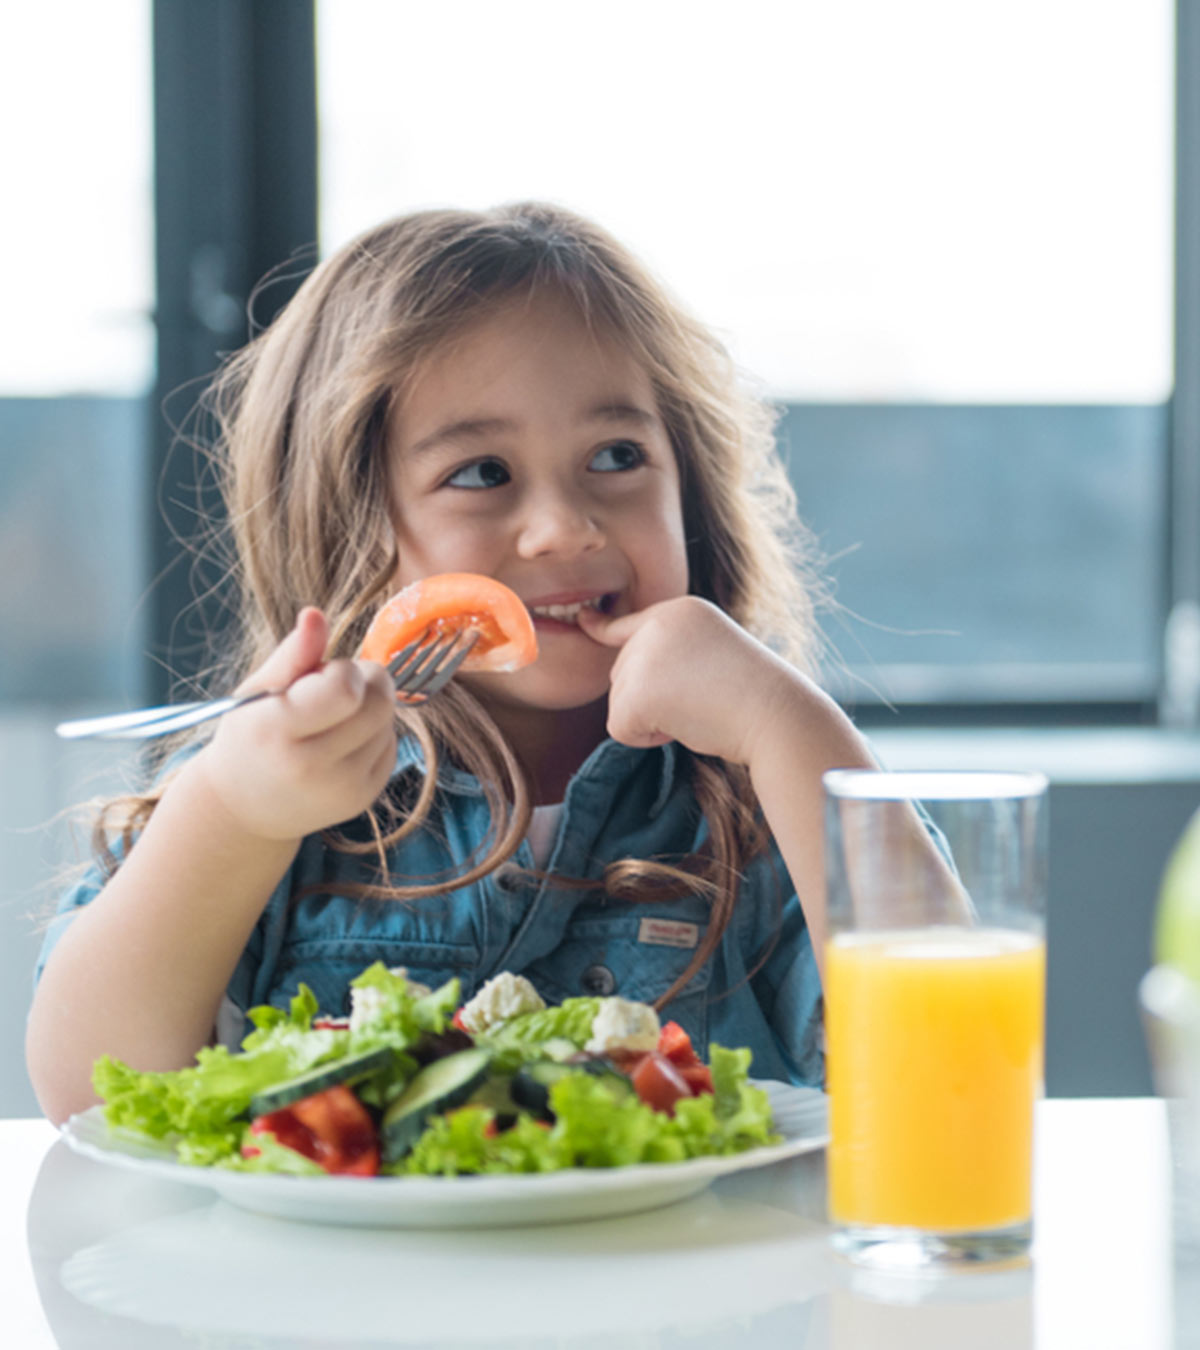 Top 20 Healthy Foods For Kids And Tips To Make Them Eat